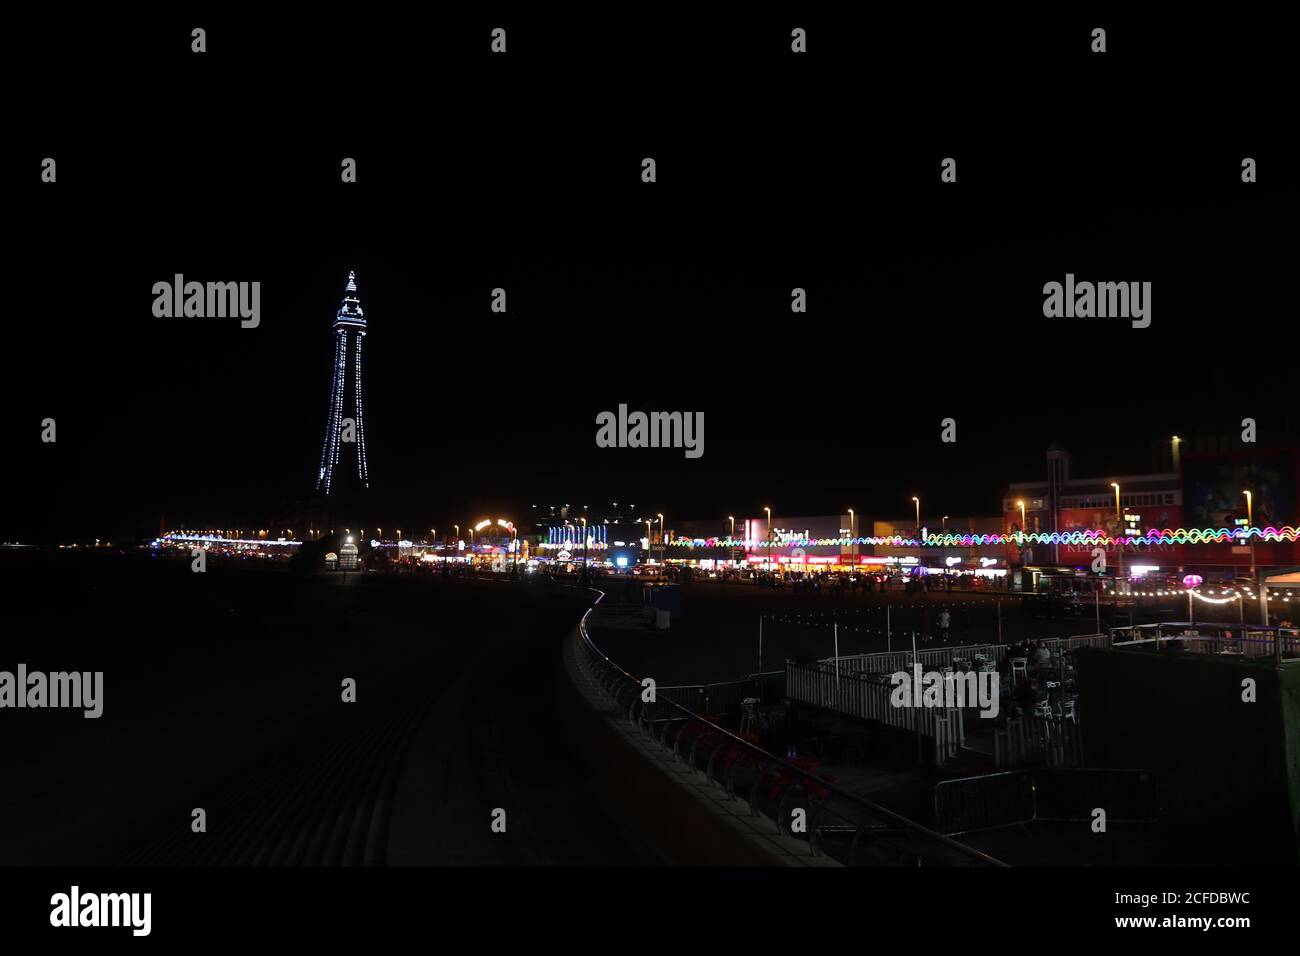 Blackpool on the first day of the annual lights display in the north west England seaside resort. This year the lights will remain on display until January, two months longer than normal, to help boost the tourism trade which has been hit by the Covid-19 pandemic. Stock Photo